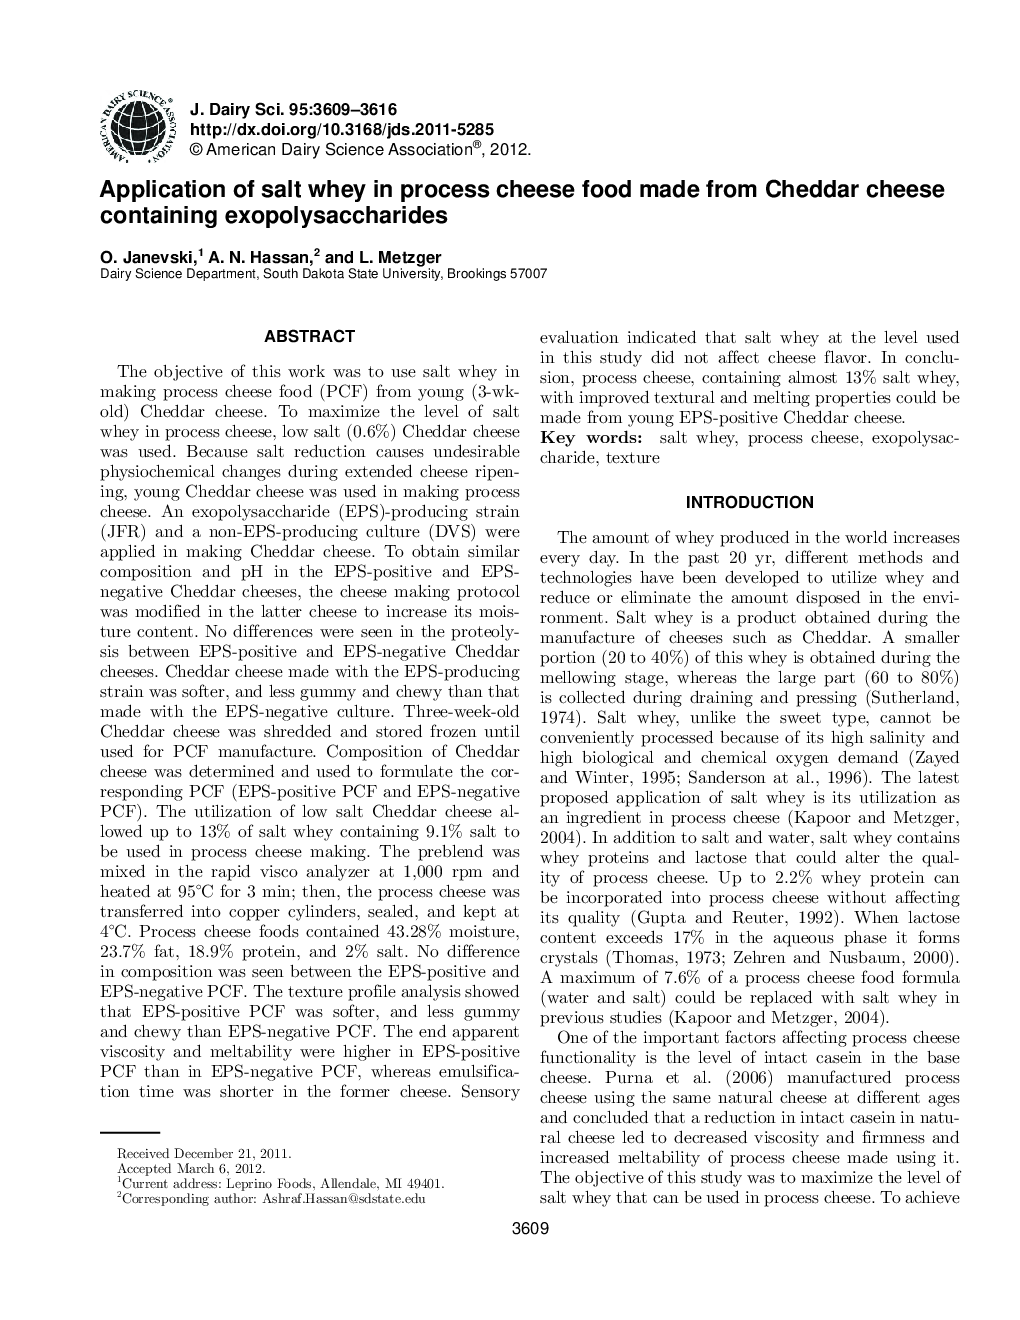 Application of salt whey in process cheese food made from Cheddar cheese containing exopolysaccharides